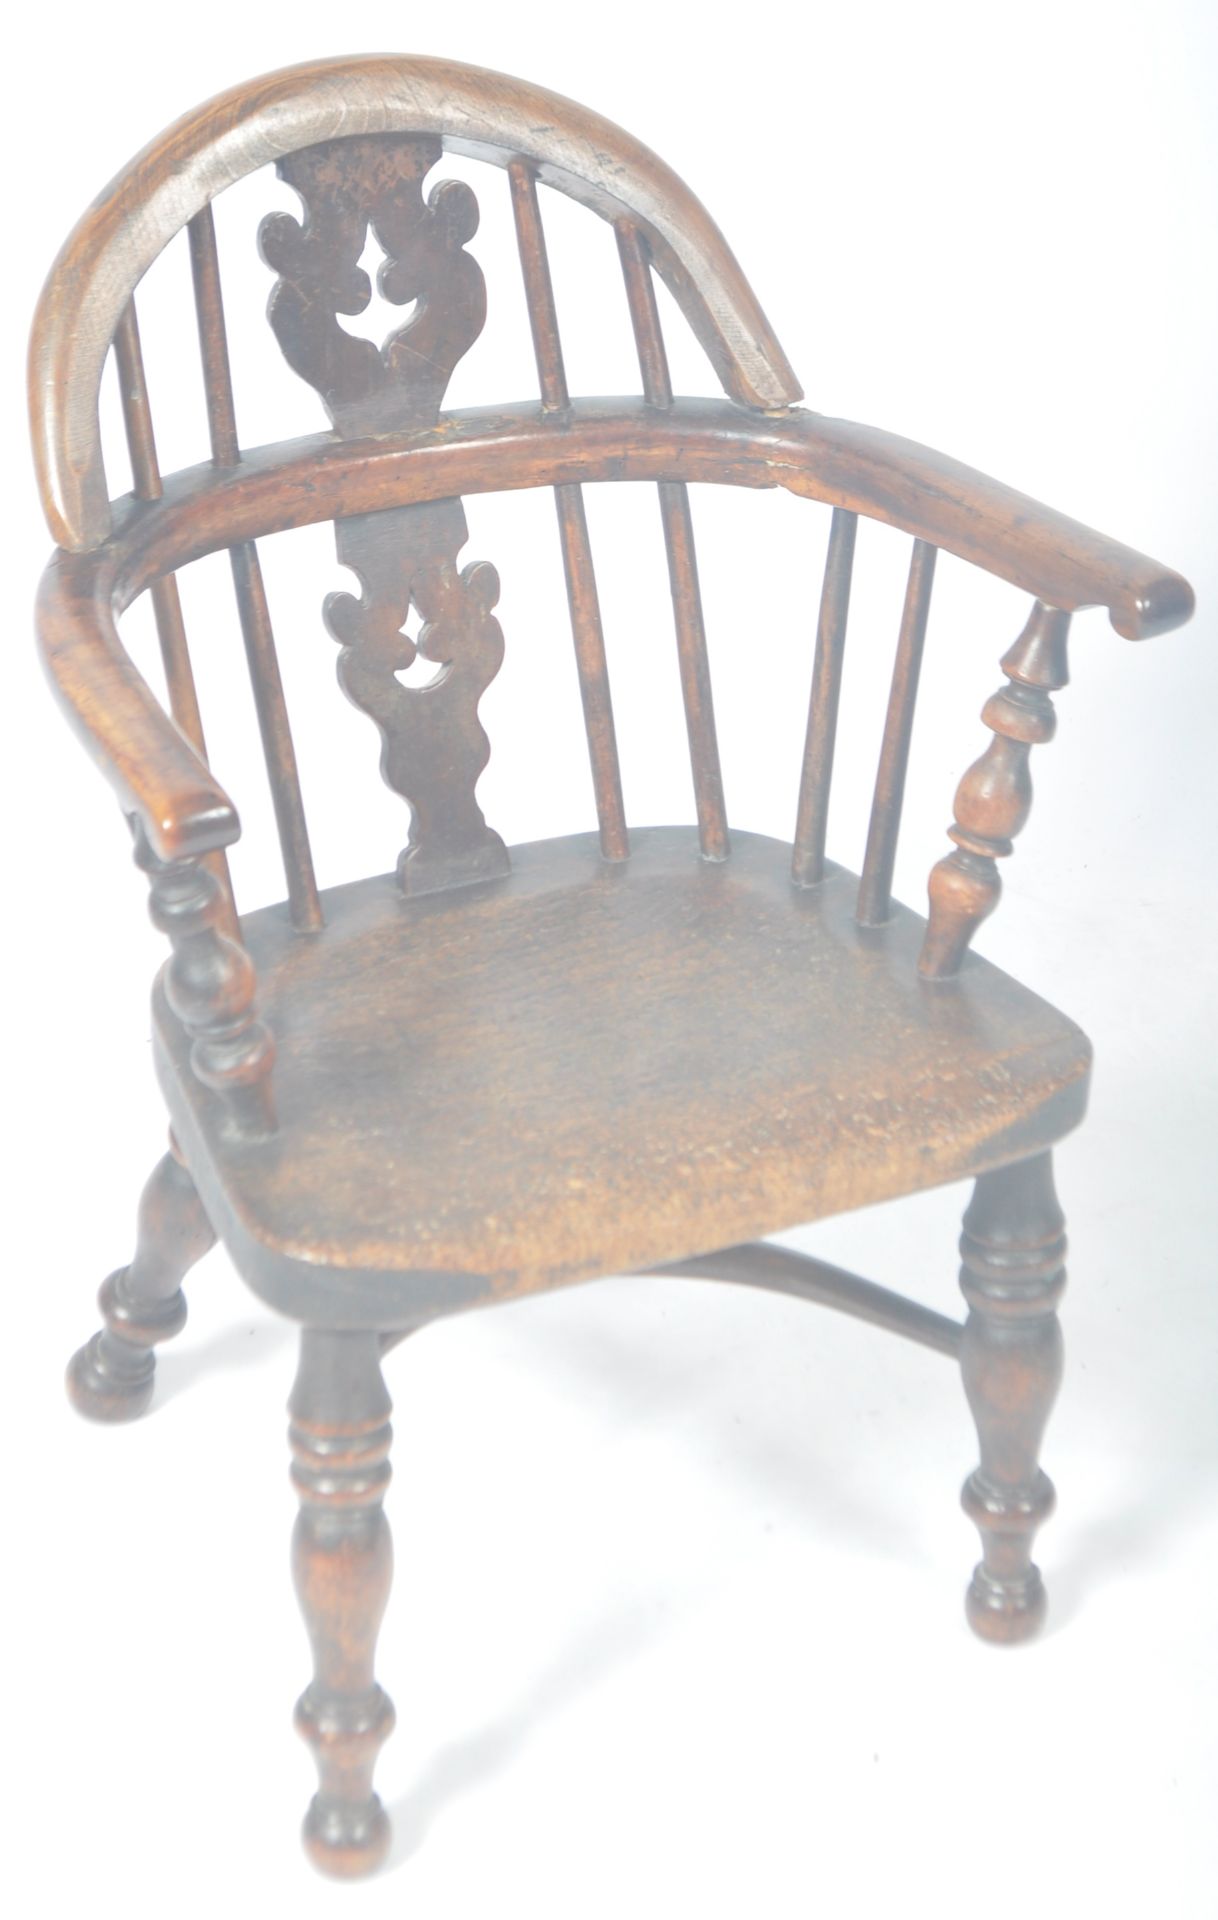 RARE ANTIQUE COUNTRY HOUSE YEW AND ELM CHILDS WINDSOR CHAIR - Image 2 of 8